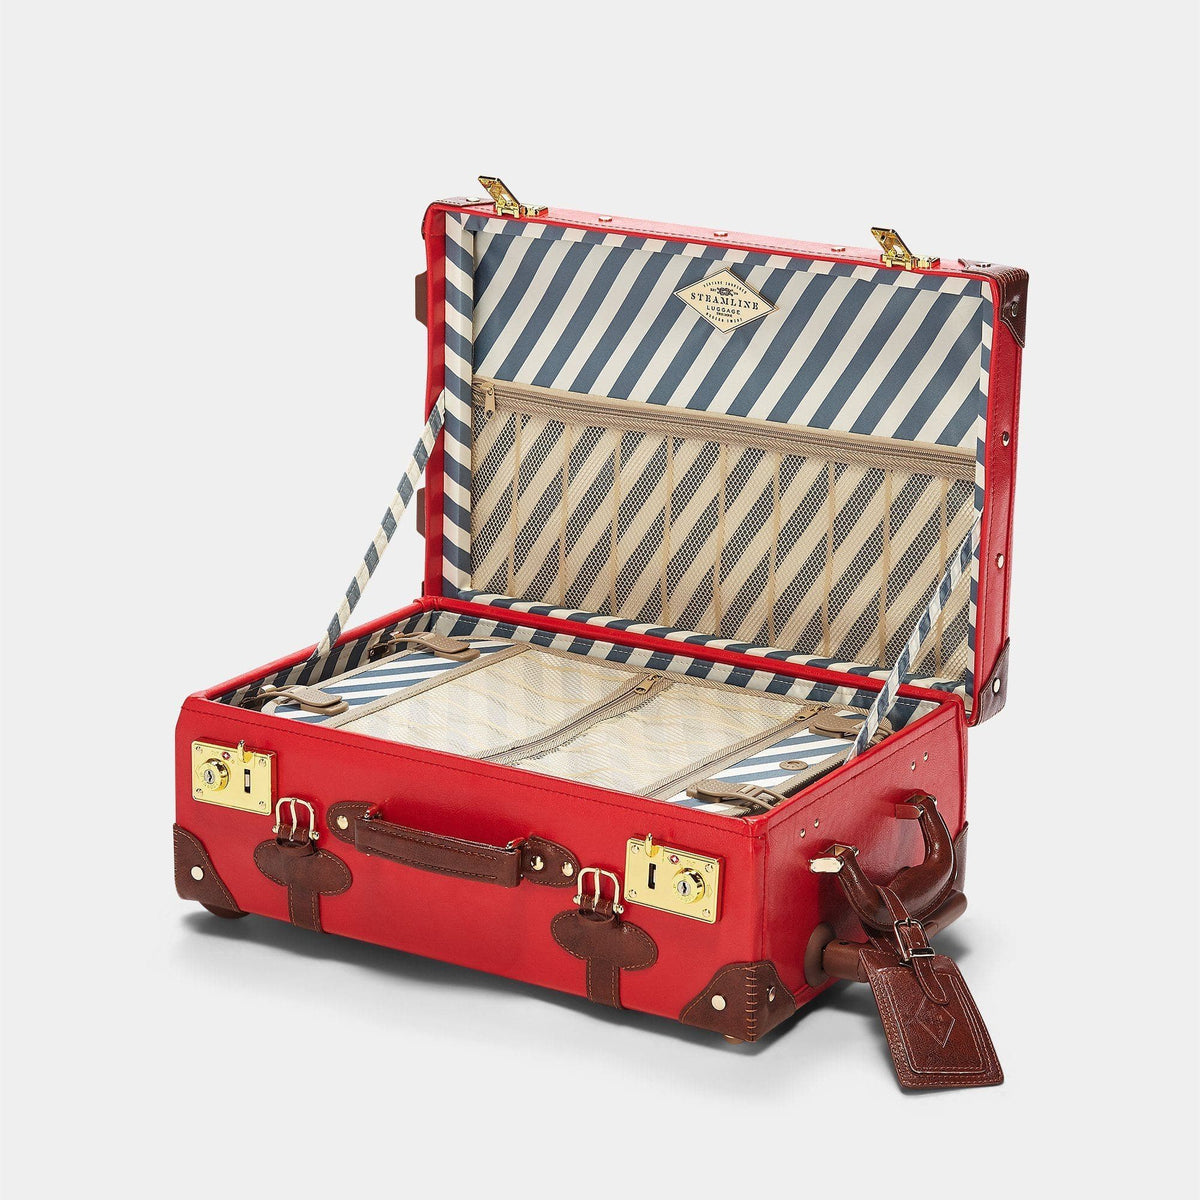 The Entrepreneur Carryon  Old Fashioned Luggage Trunk Cabin